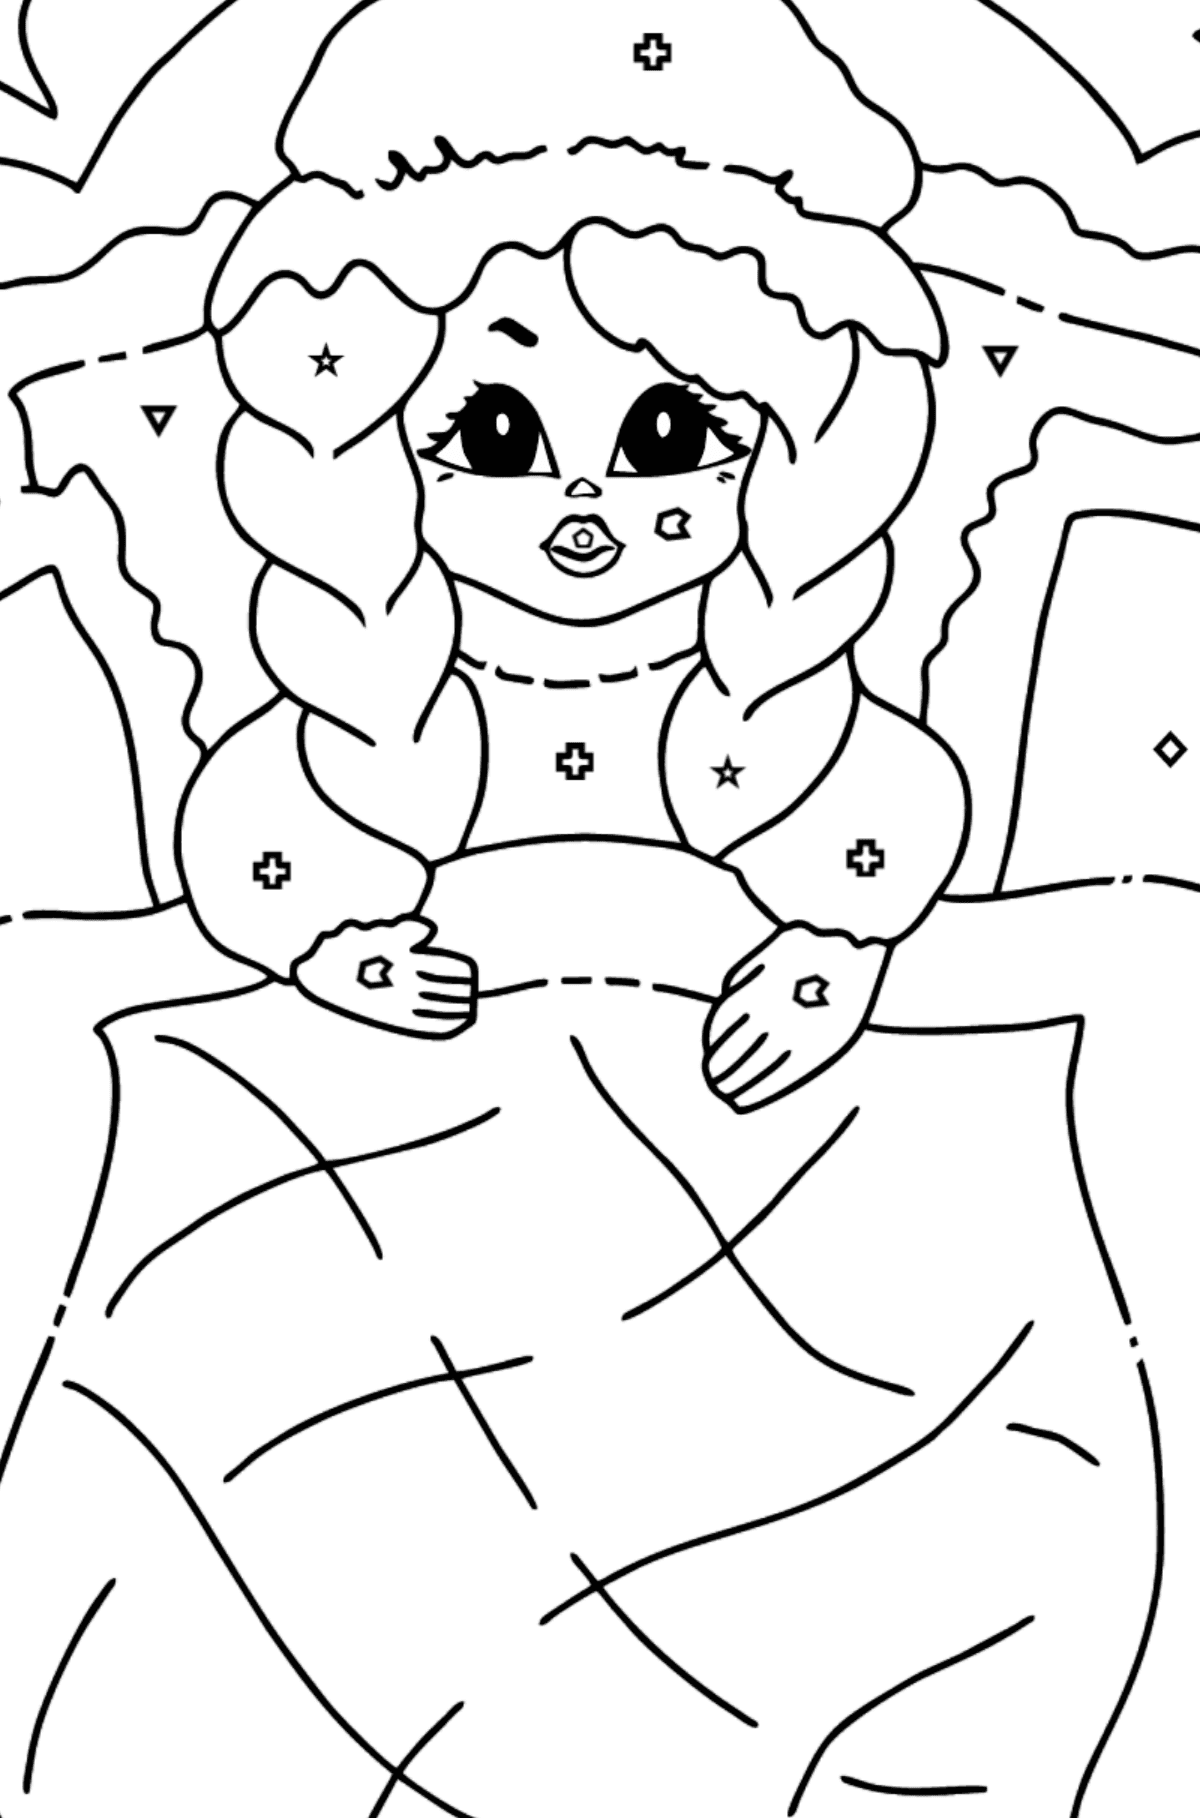 Coloring Picture - A Princess in Bed - Coloring by Symbols and Geometric Shapes for Kids